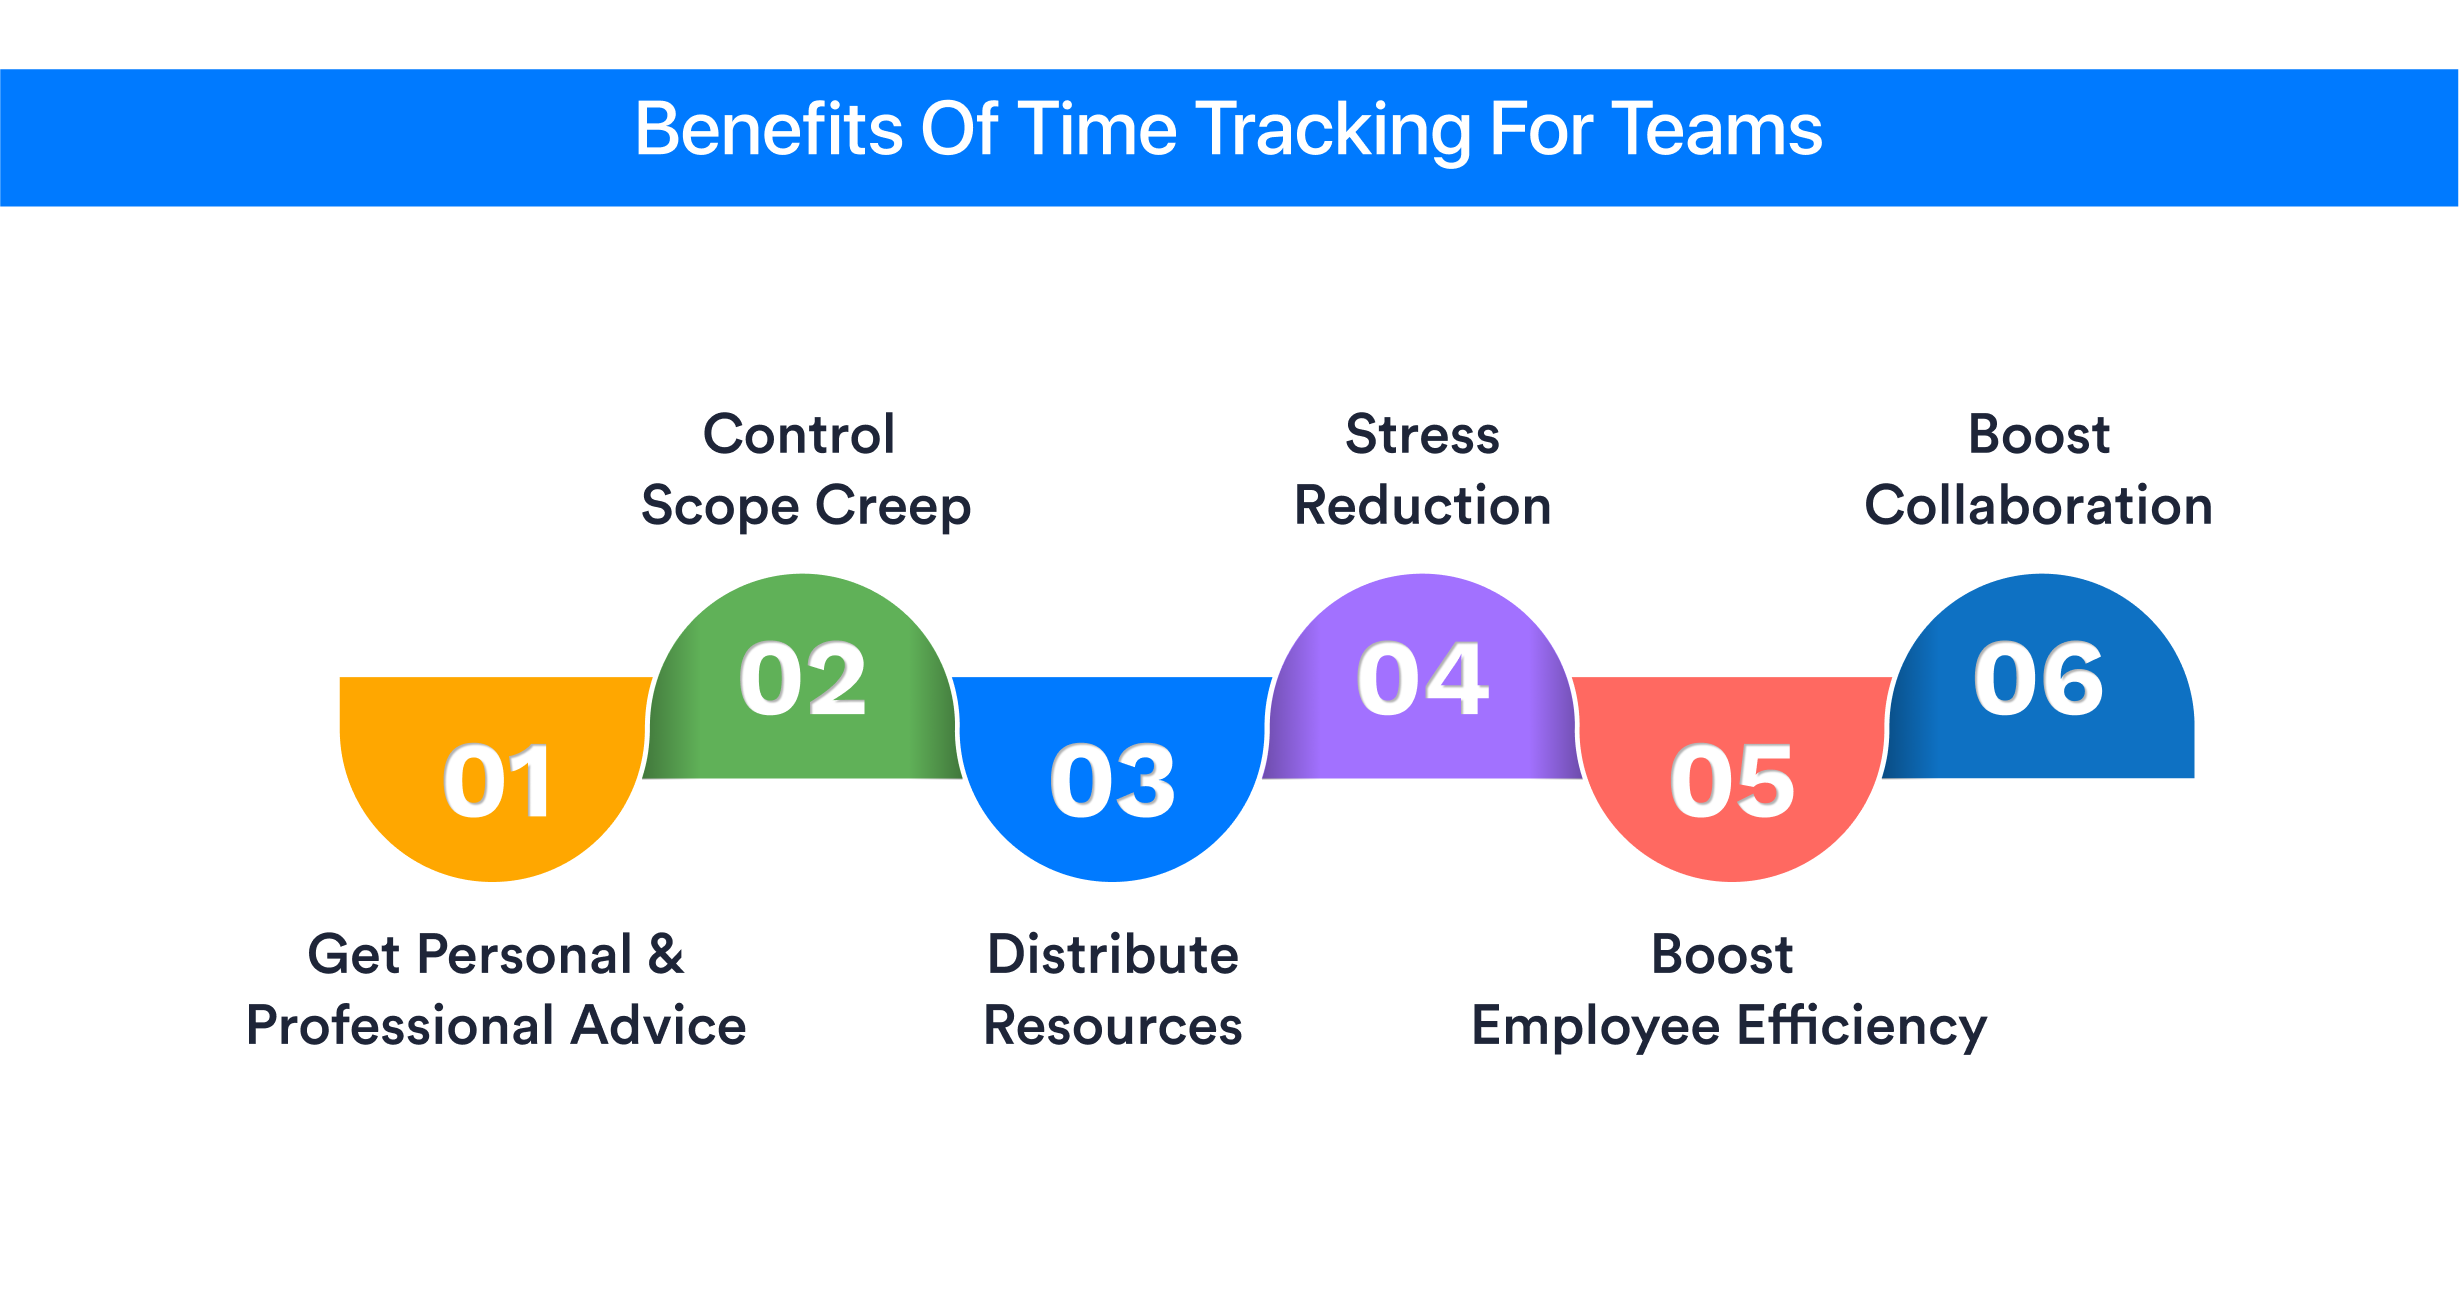 Benefits of Time Tracking for Teams